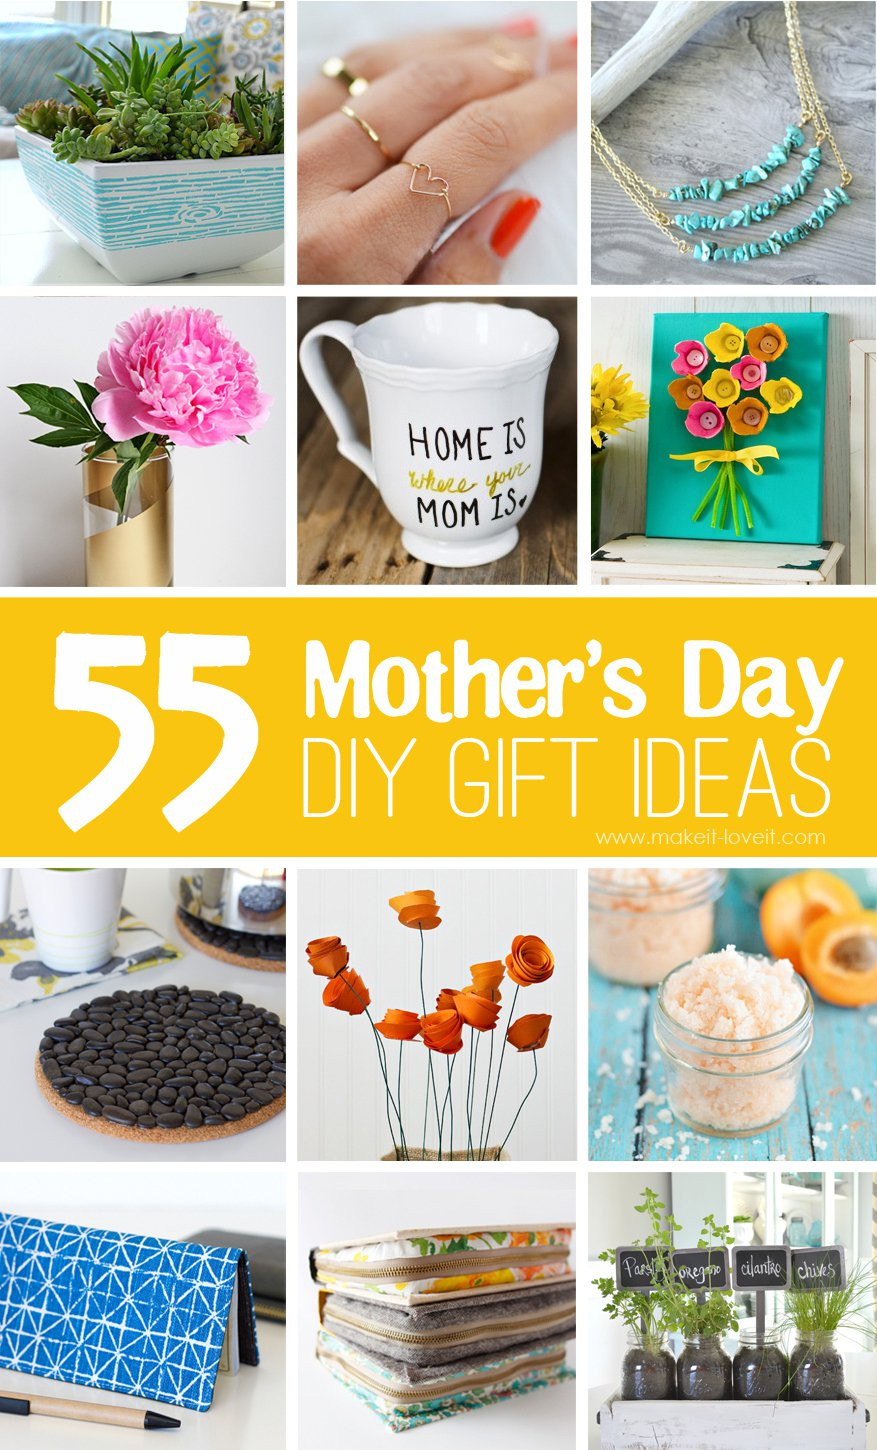 Mothers Day Gift Ideas Pinterest
 40 Homemade Mother s Day Gift Ideas